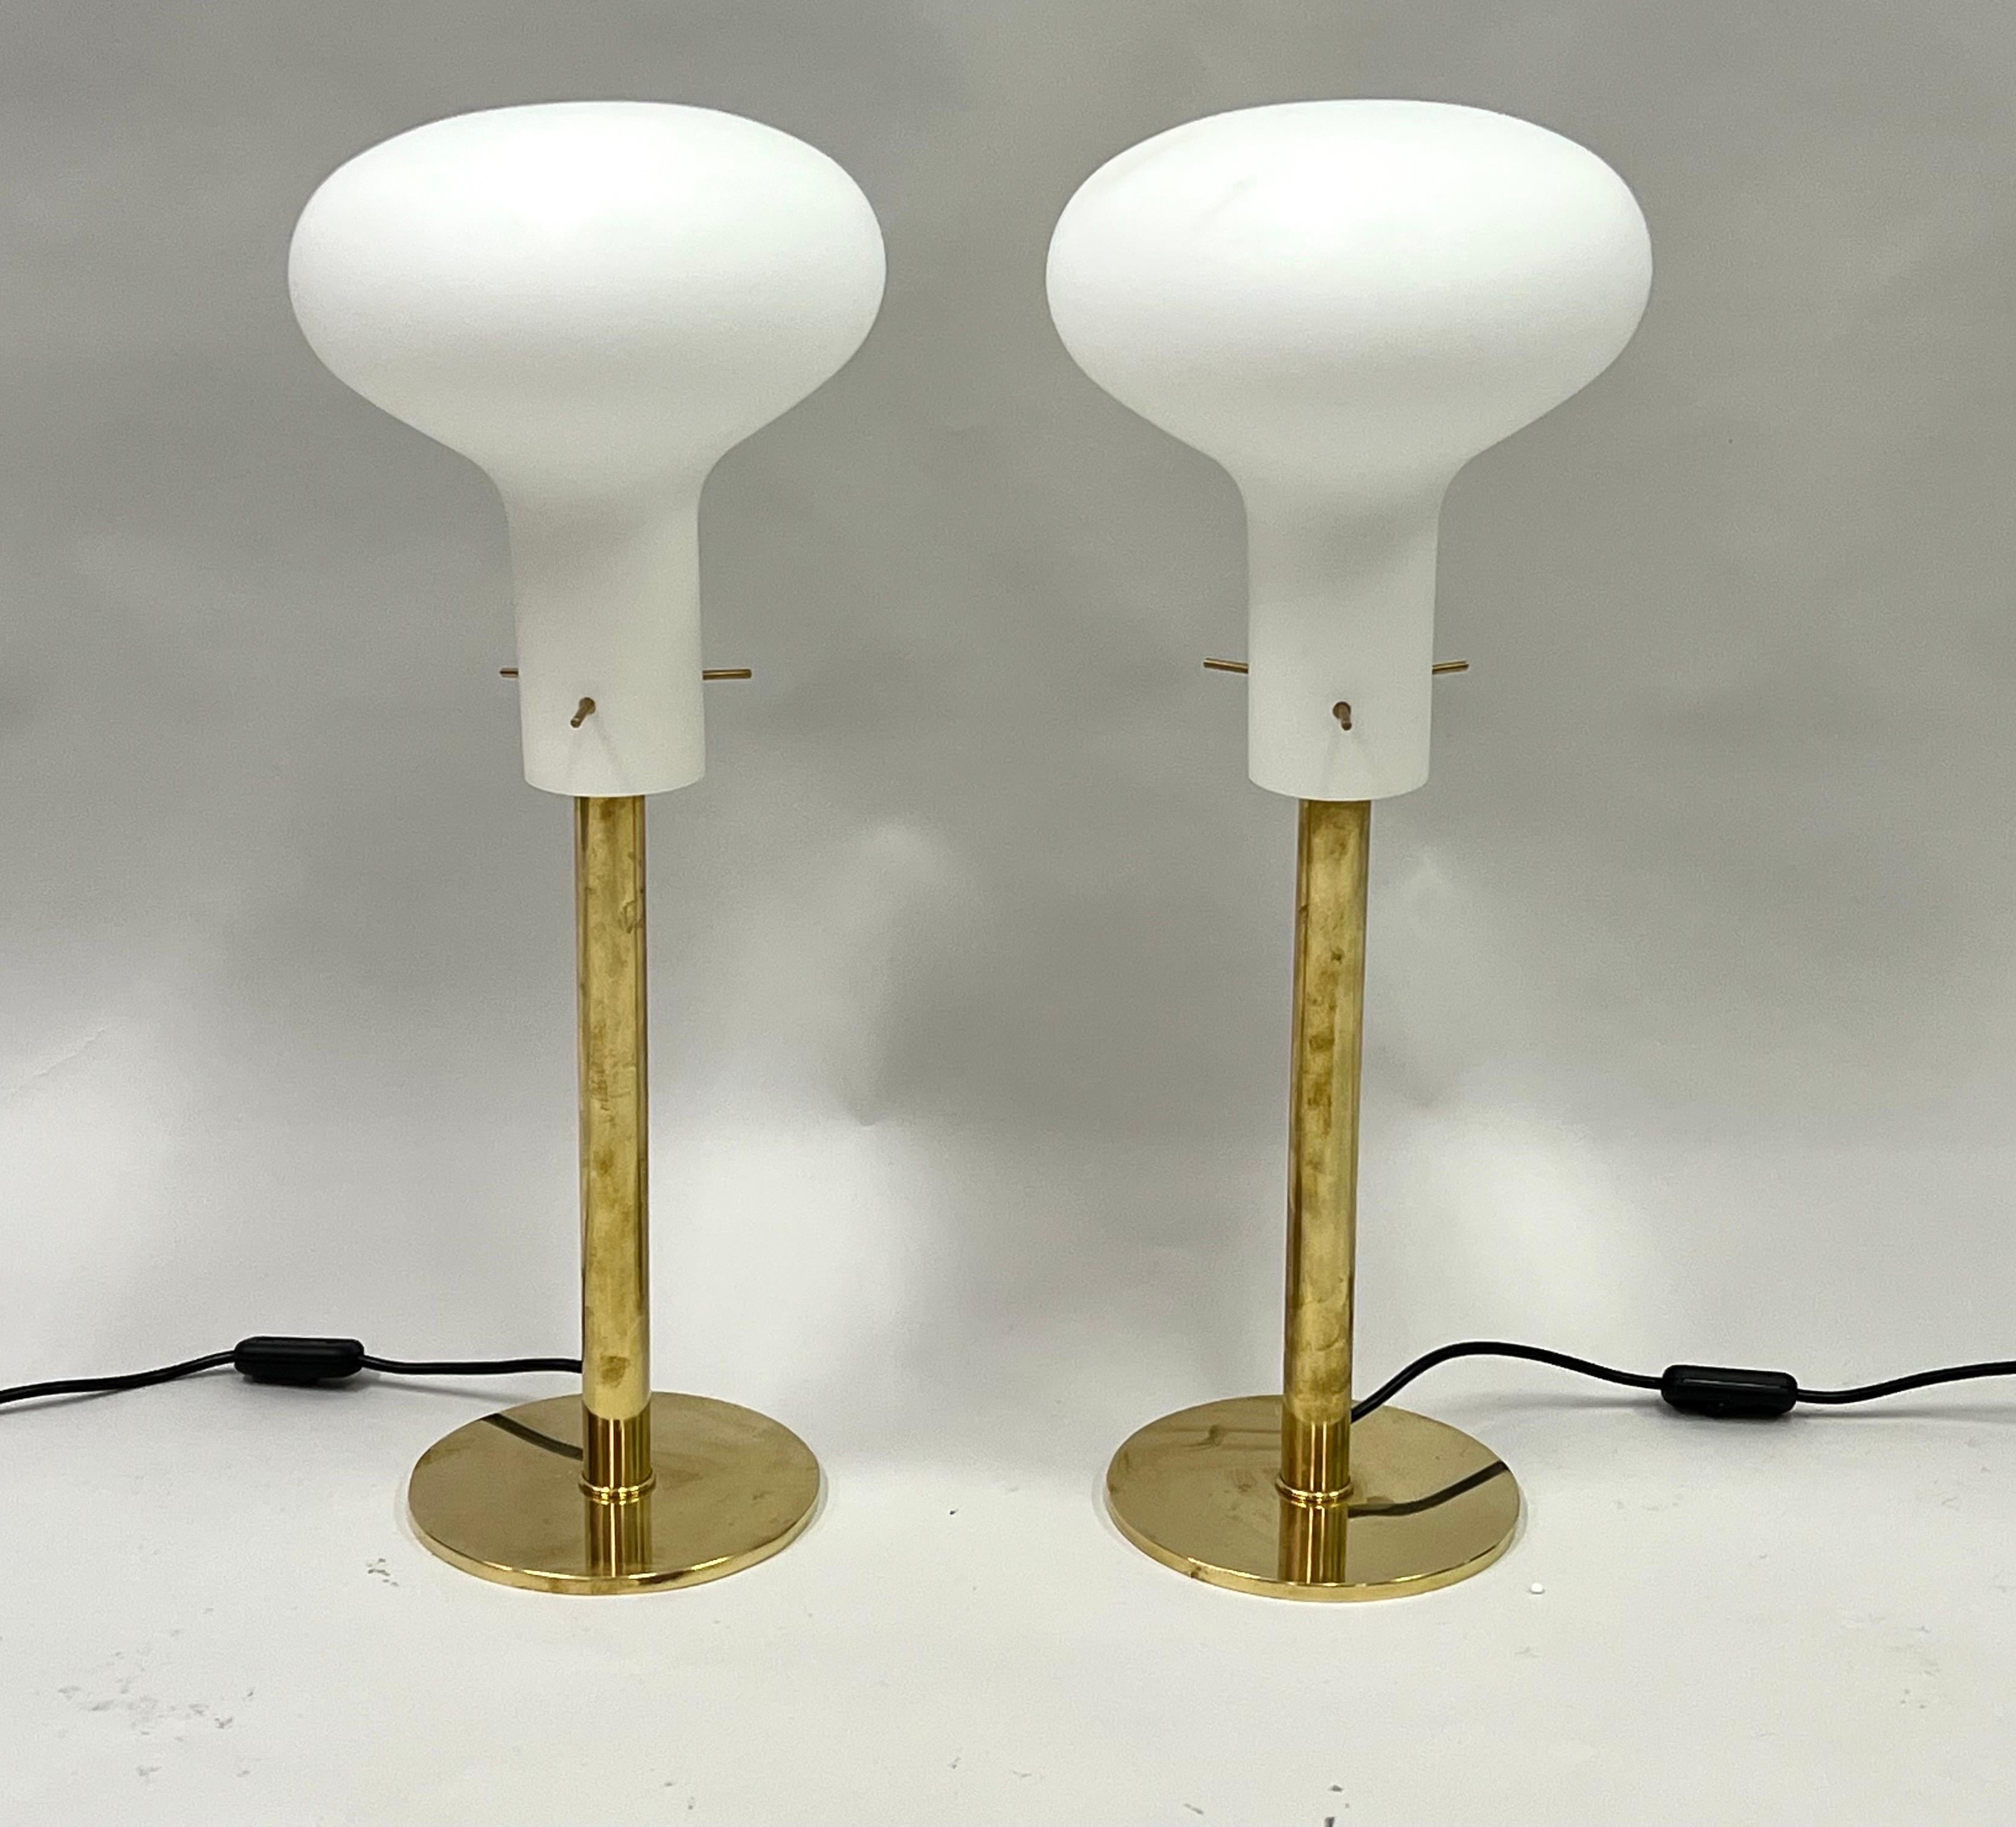 An elegant and timeless pair of Italian Mid-Century Modern table lamps attributed to Max Ingrand and Fontana Arte. The table lamps are of rare design and the highest quality of manufacture. They feature an original form with a pure, round brass base